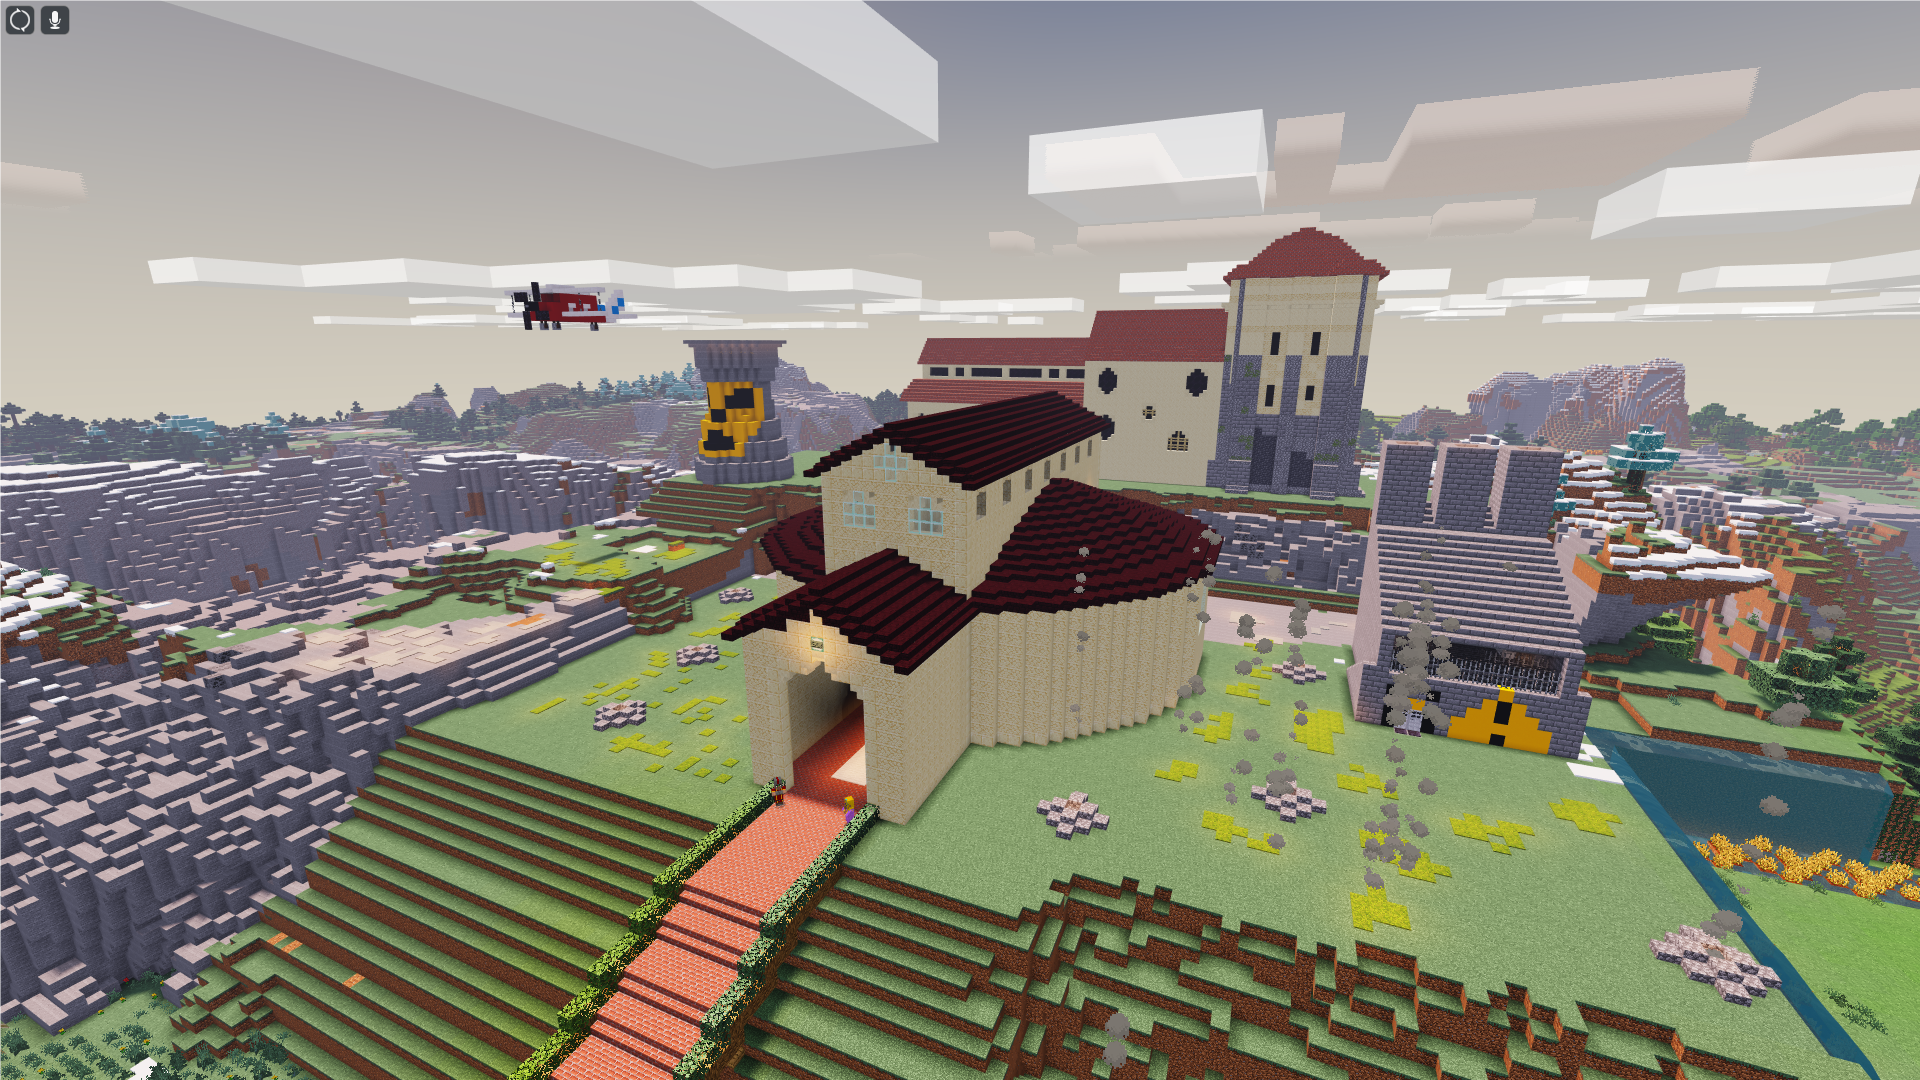 The Lombards in Minecraft: awarded the winning schools of the competition